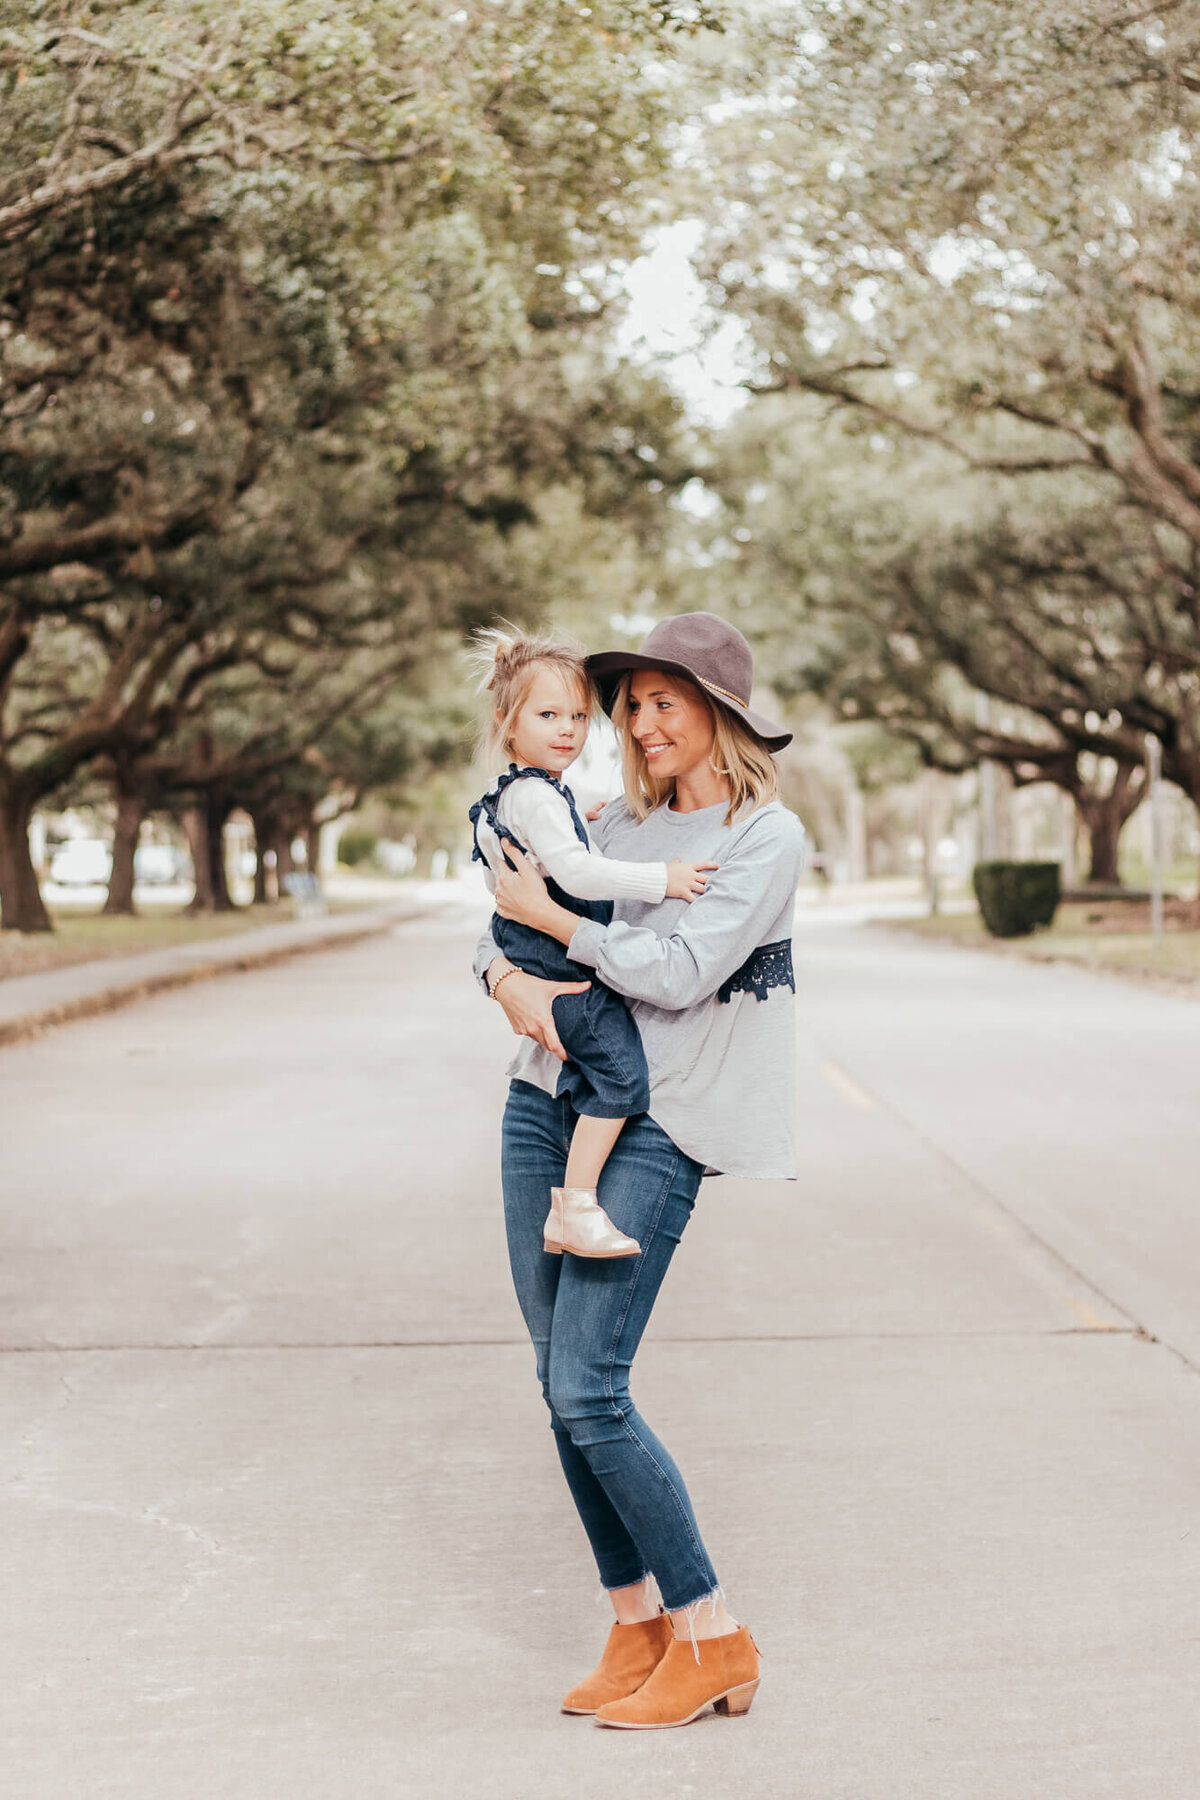 Stylish mom holds her toddler daughter in a beautiful street in Friendswood, Texas wearing a hat and  booties while daughter has messy pigtails and overalls.